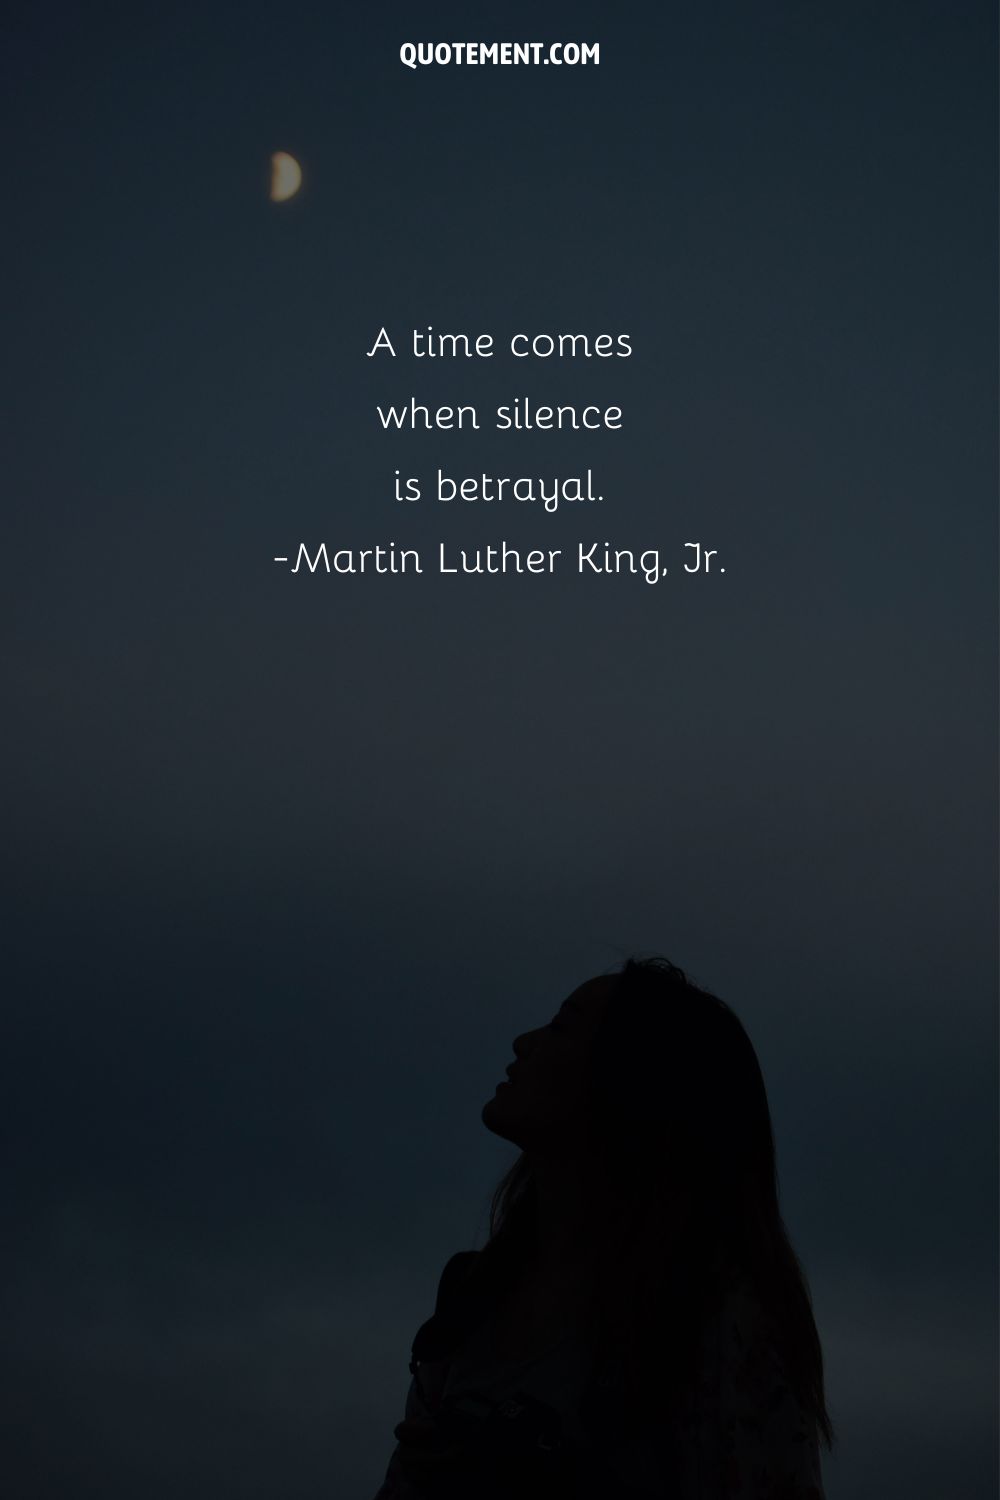 A time comes when silence is betrayal